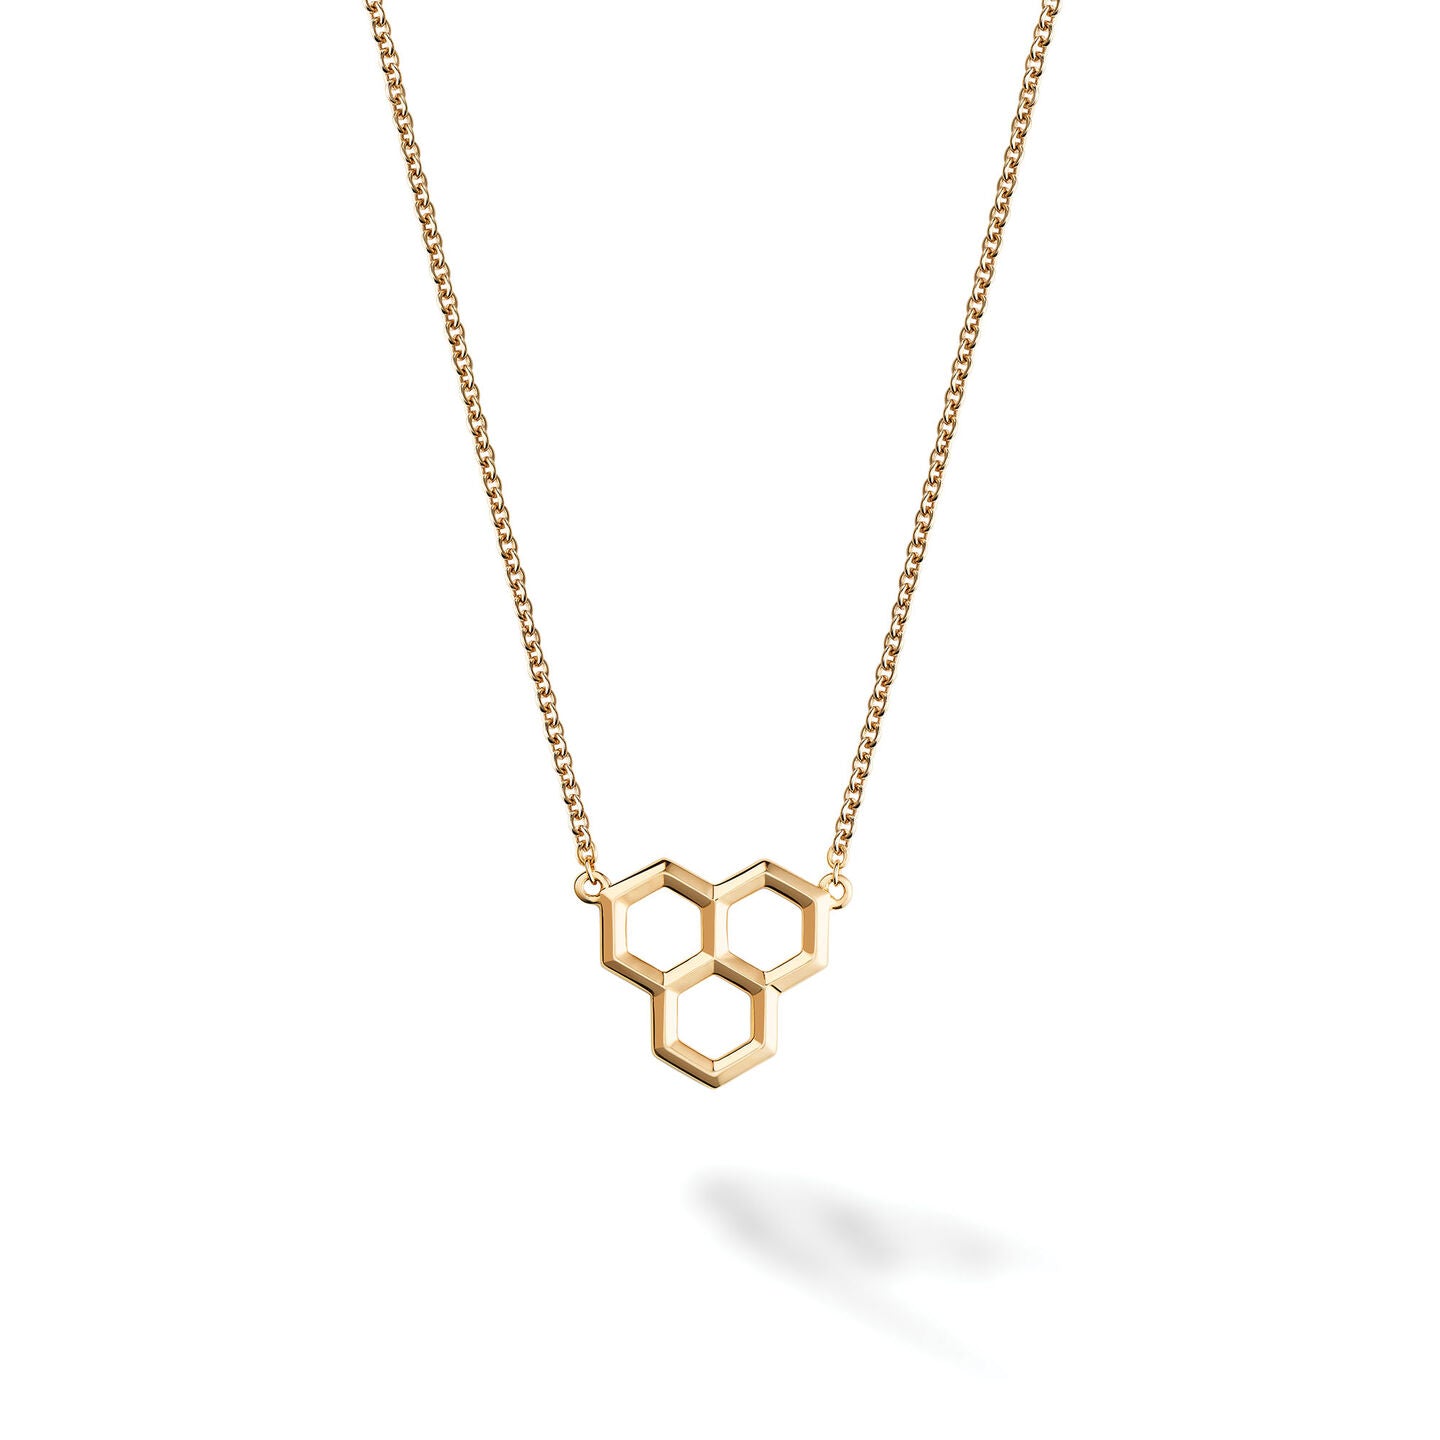 Birks 18KY Bee Chic Honeycomb Necklace